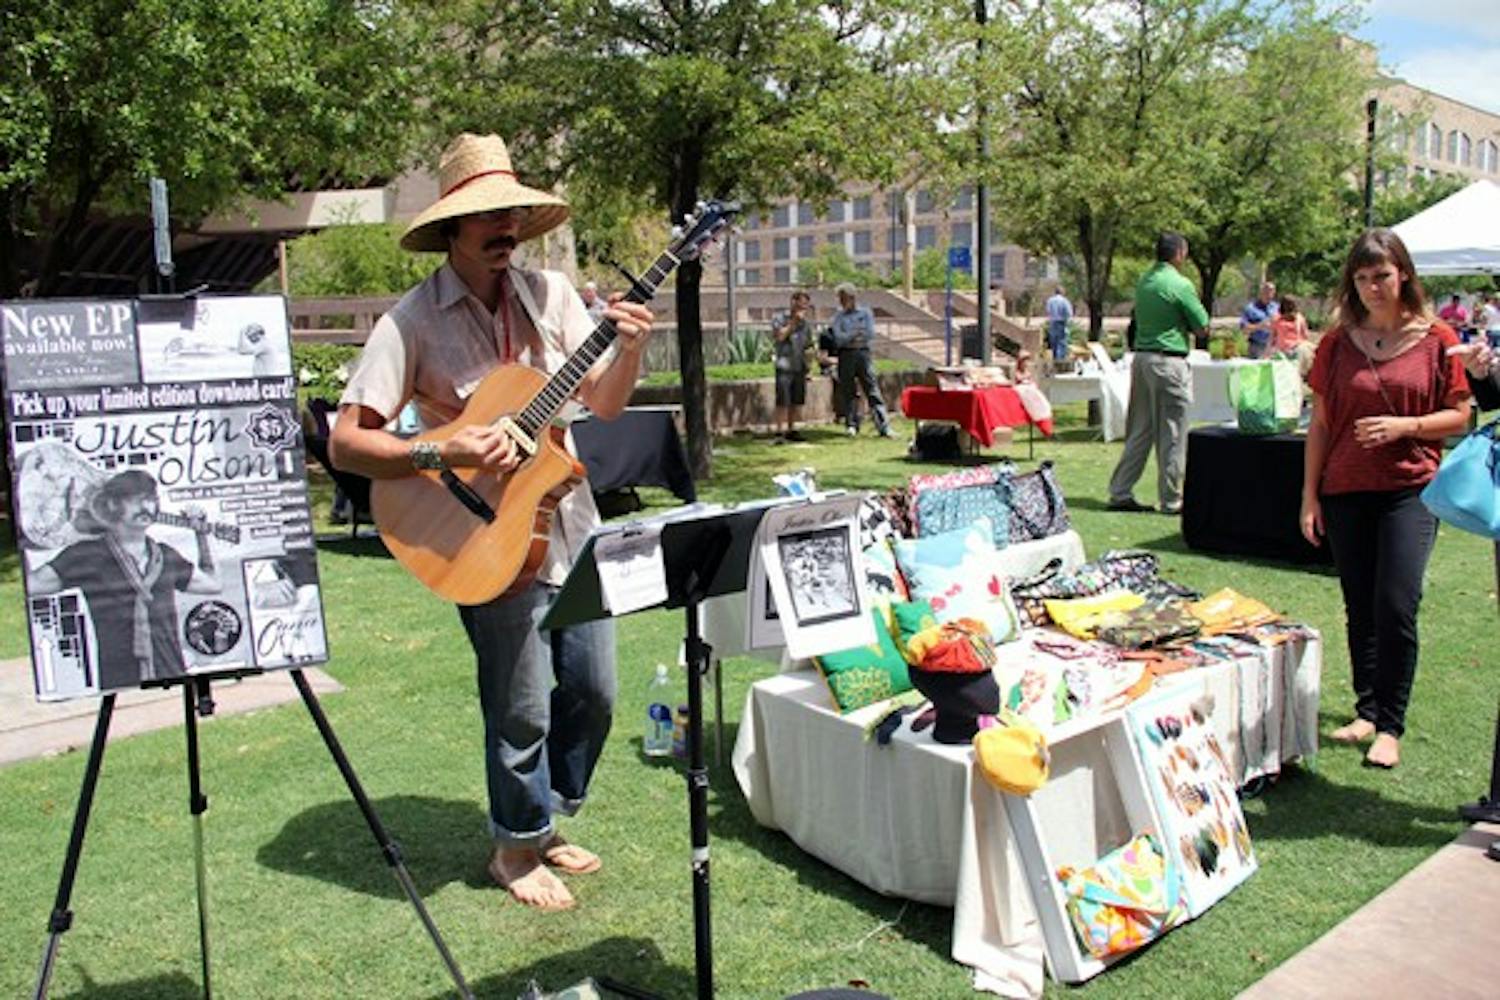 Justin Olson performs at the Green Business Expo in Tempe on Wednesday morning. (Photo by Diana Lustig)